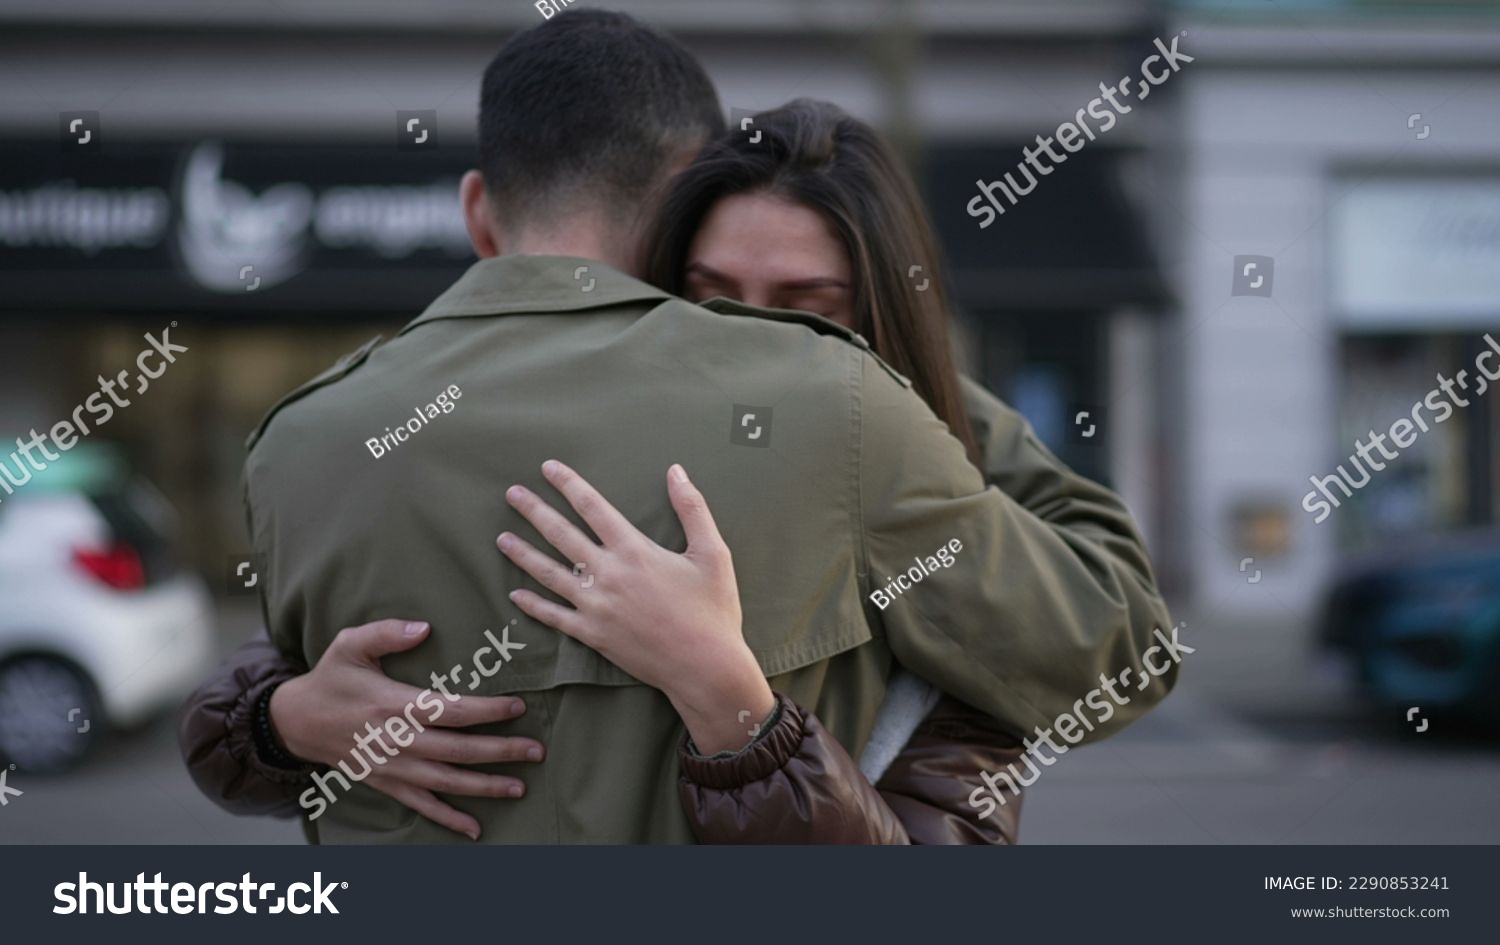 Young couple romantic embrace outside in urban street. Man consoling girlfriend suffering from problems. Empathic relationship concept #2290853241